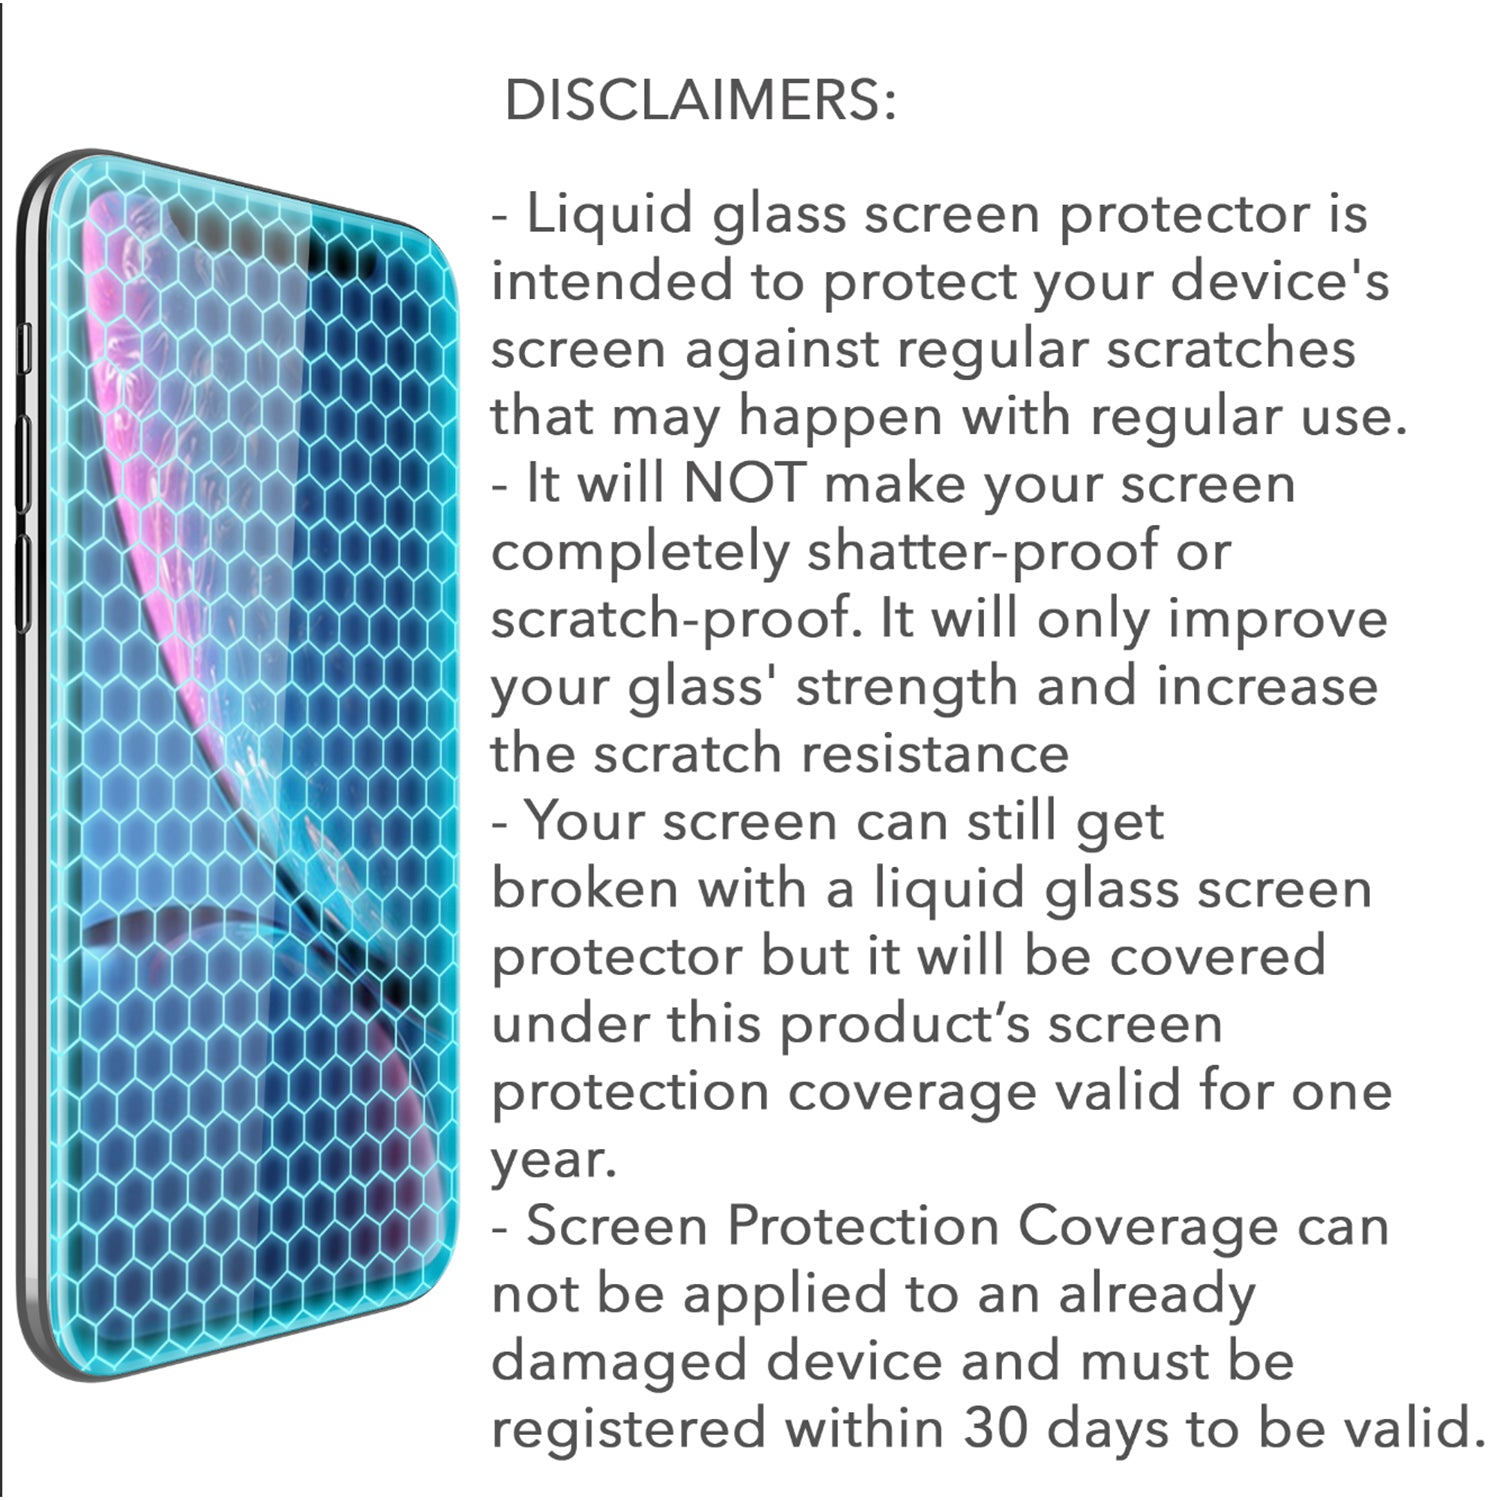 Liquid Glass Screen Protector with $500 Screen Protection Guarantee - Universal